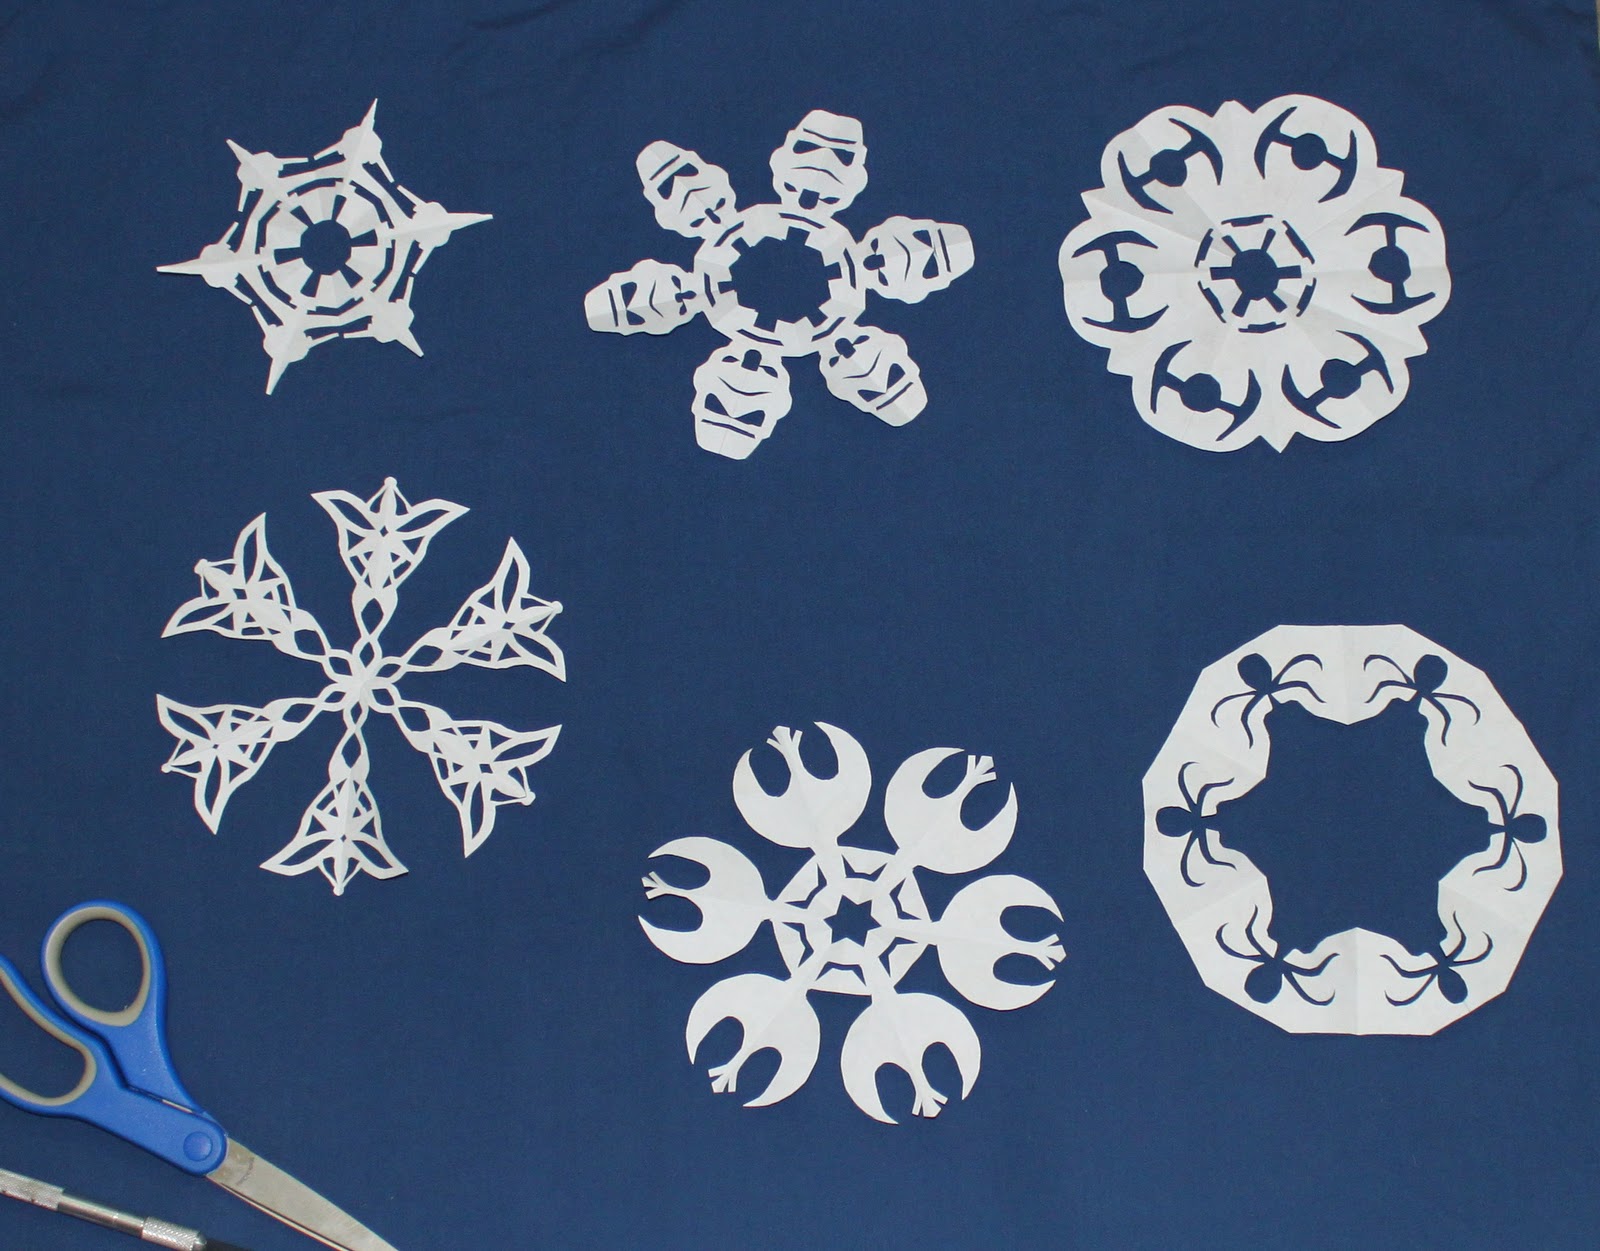 cation-designs-geeky-star-wars-and-lotr-snowflakes